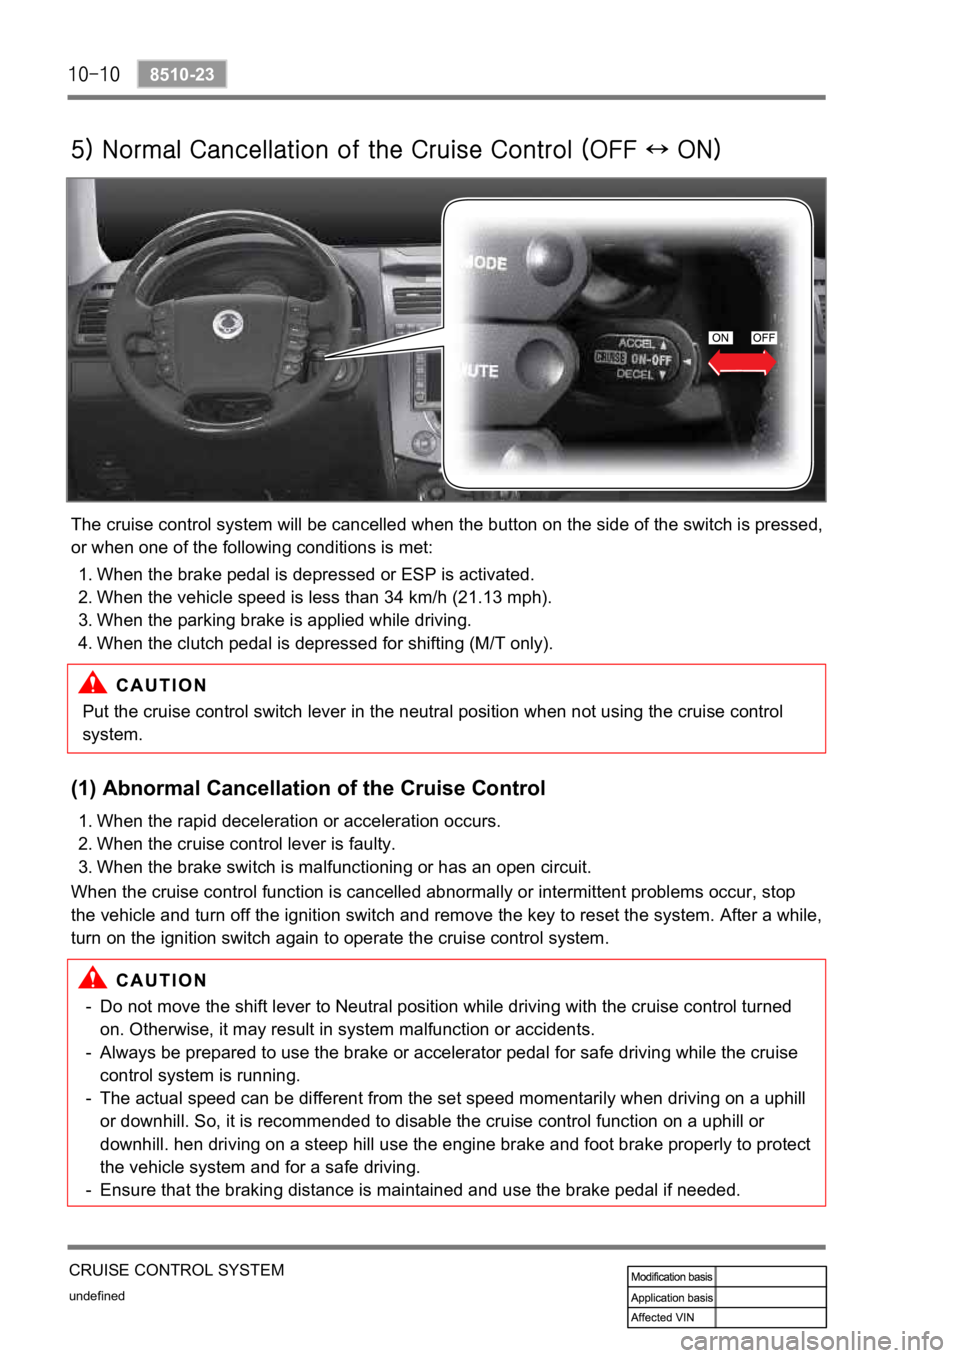 SSANGYONG REXTON 2008  Service Manual undefined
8510-23
CRUISE CONTROL SYSTEM
The cruise control system will be cancelled when the button on the side of the switch is pressed, 
or when one of the following conditions is met:
Put the cruis